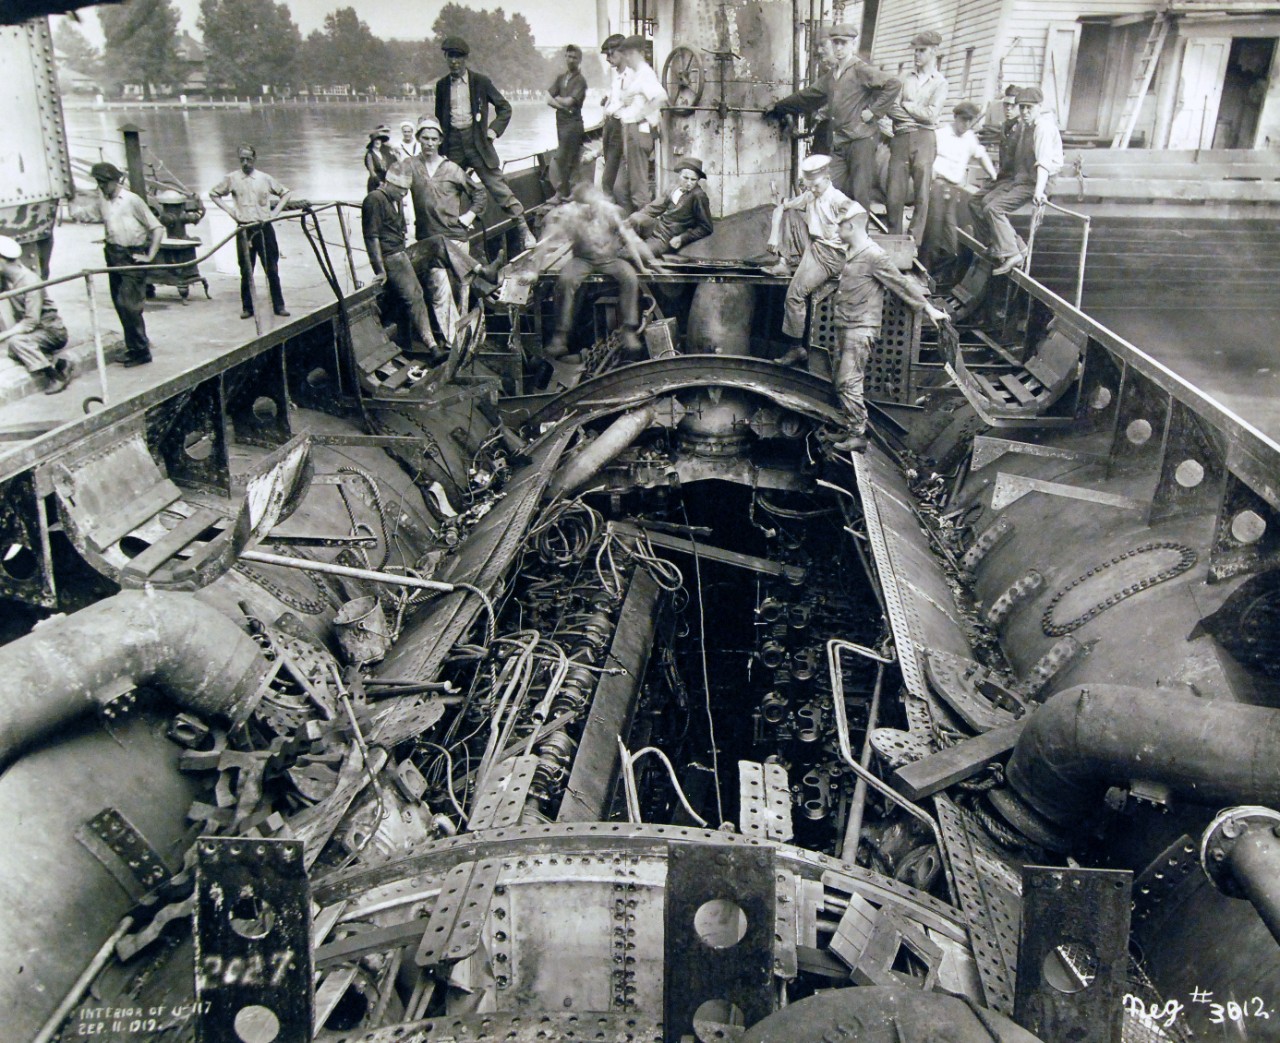 19-N-3612:   German submarine, U-117, interior view, September 11, 1919.  Official Bureau of Ships Photograph, now in the collections of the National Archives.    (12/09/2014).